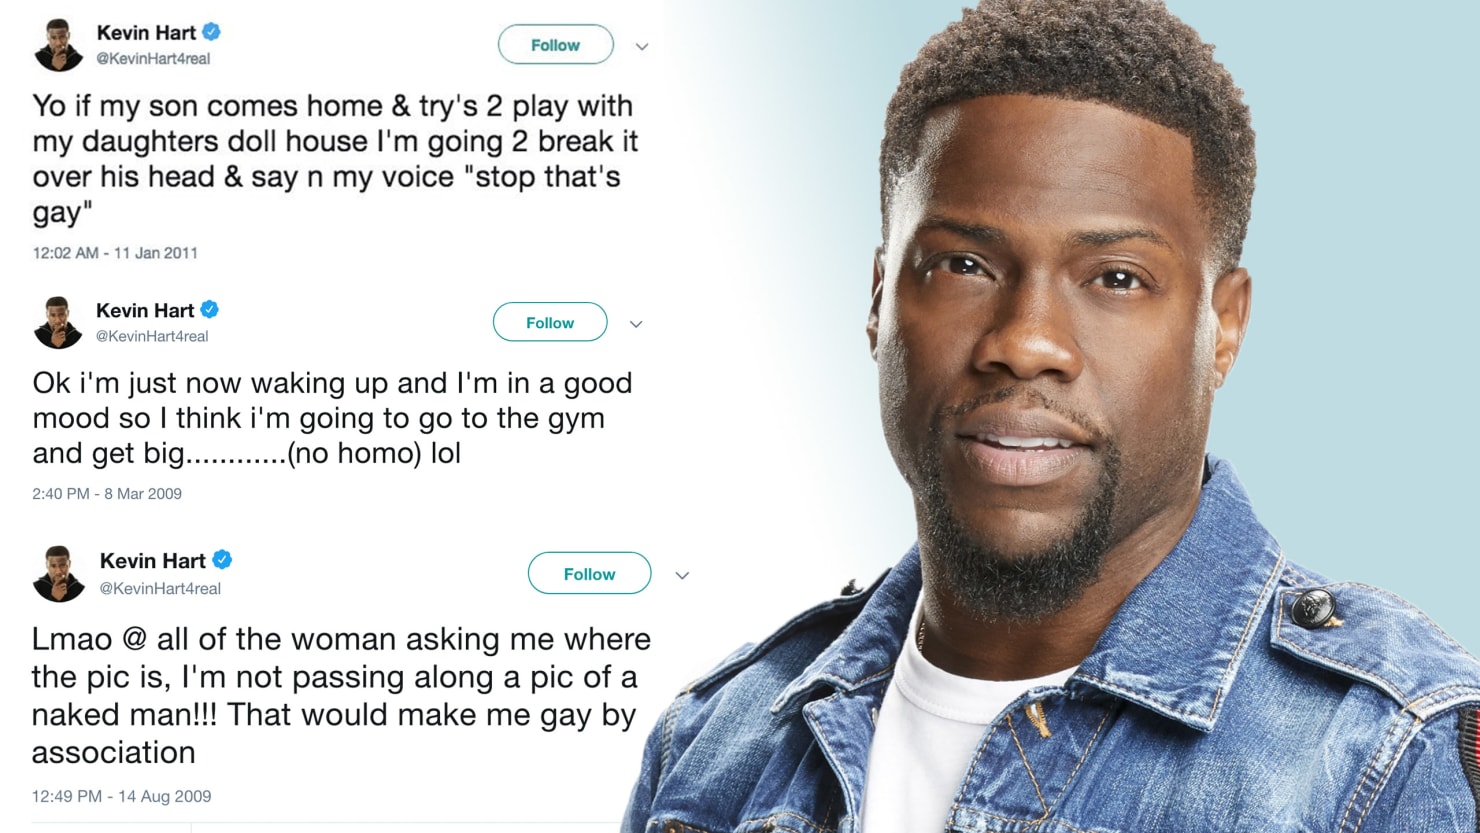 Kevin Hart - At the end of the day, women are a